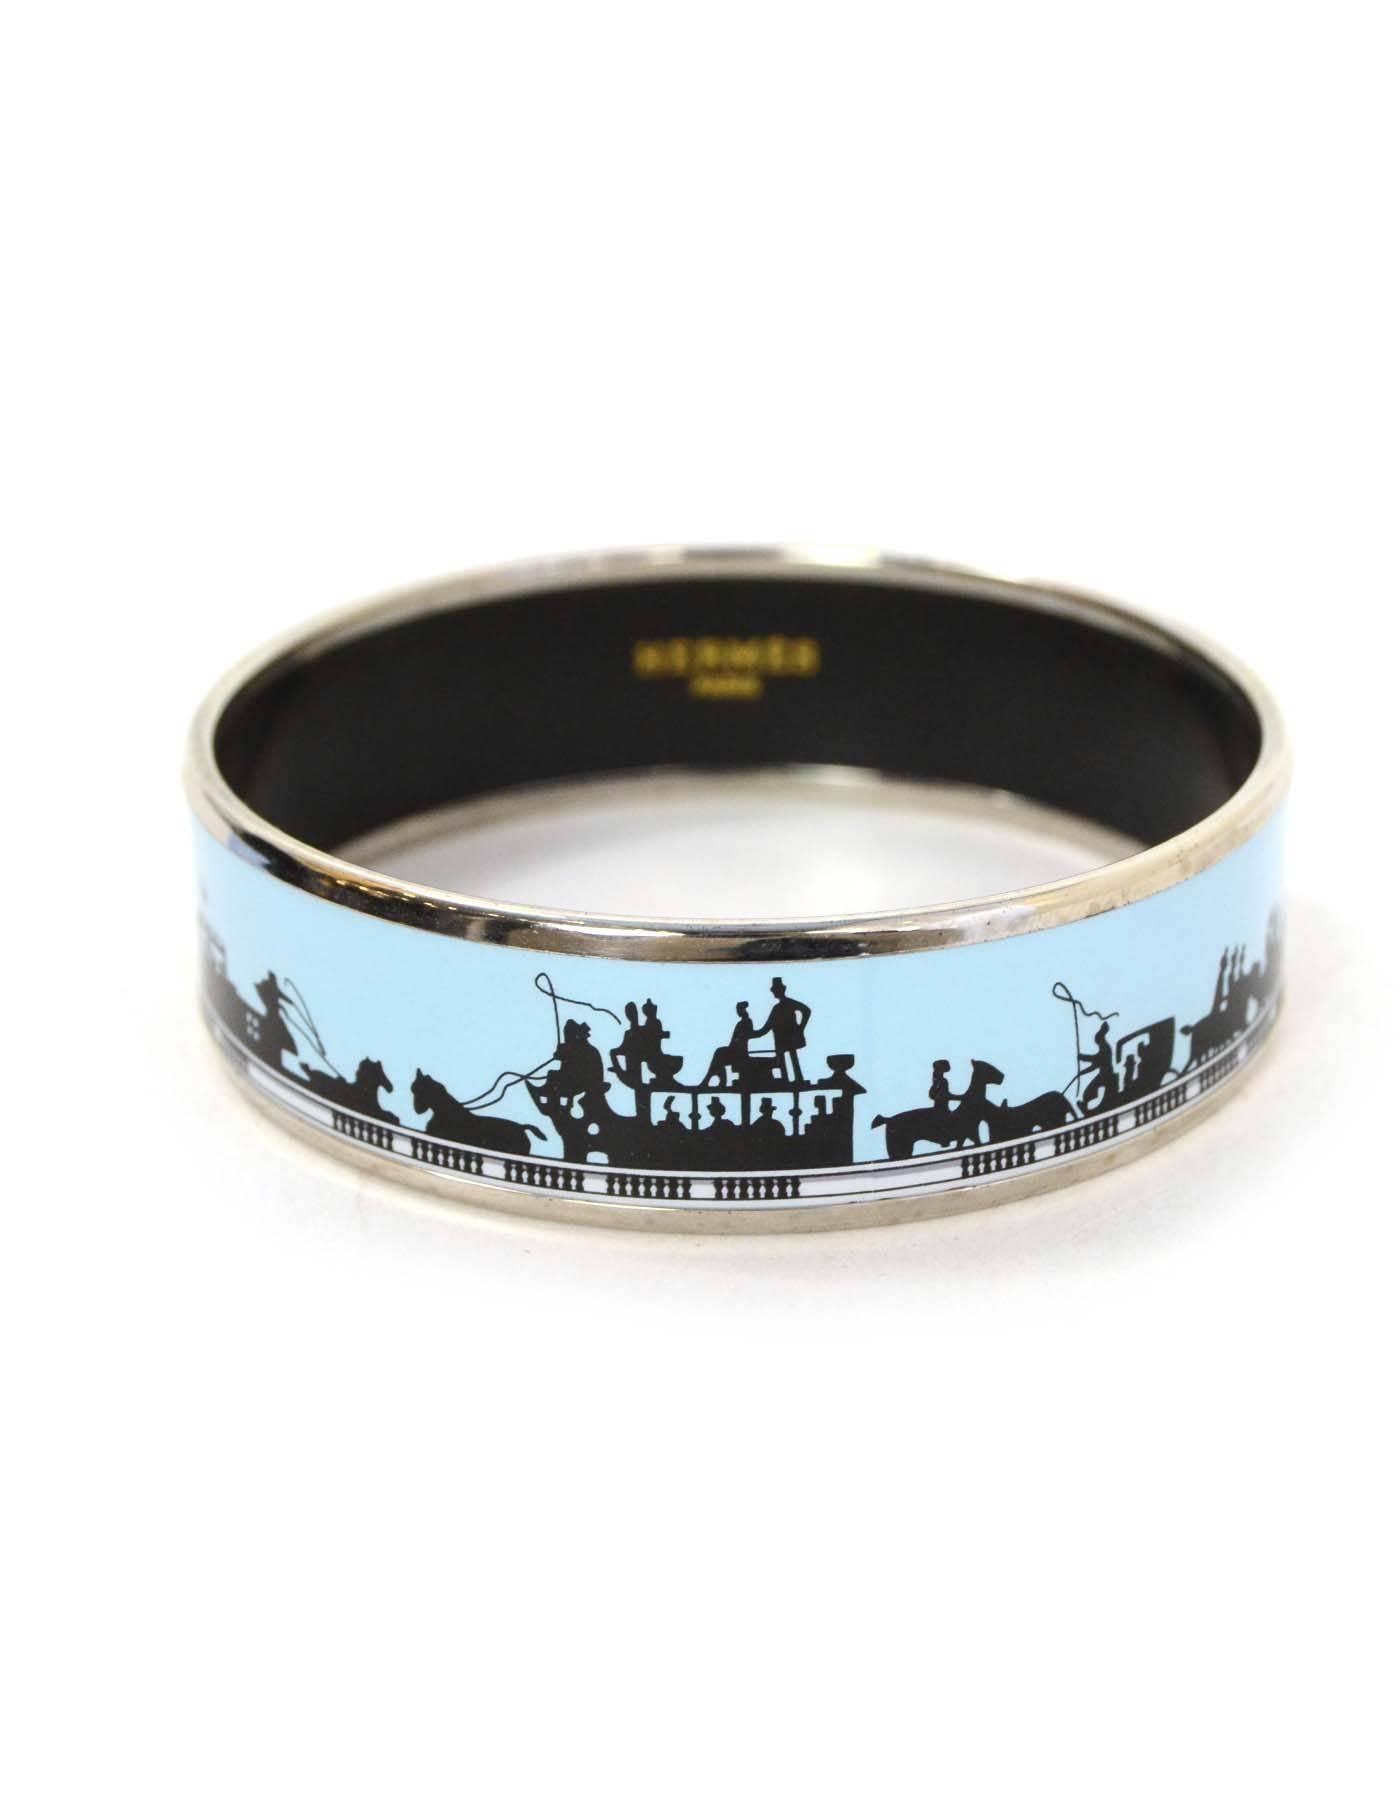 Hermes Blue and Black Printed Enamel Bangle Sz 65
Features blue and black horse and carriage design.

Made In: Austria
Color: Blue, black and palladium
Materials: Metal and enamel
Closure: None
Stamp: Hermes Paris Made in Austria + K
Retail